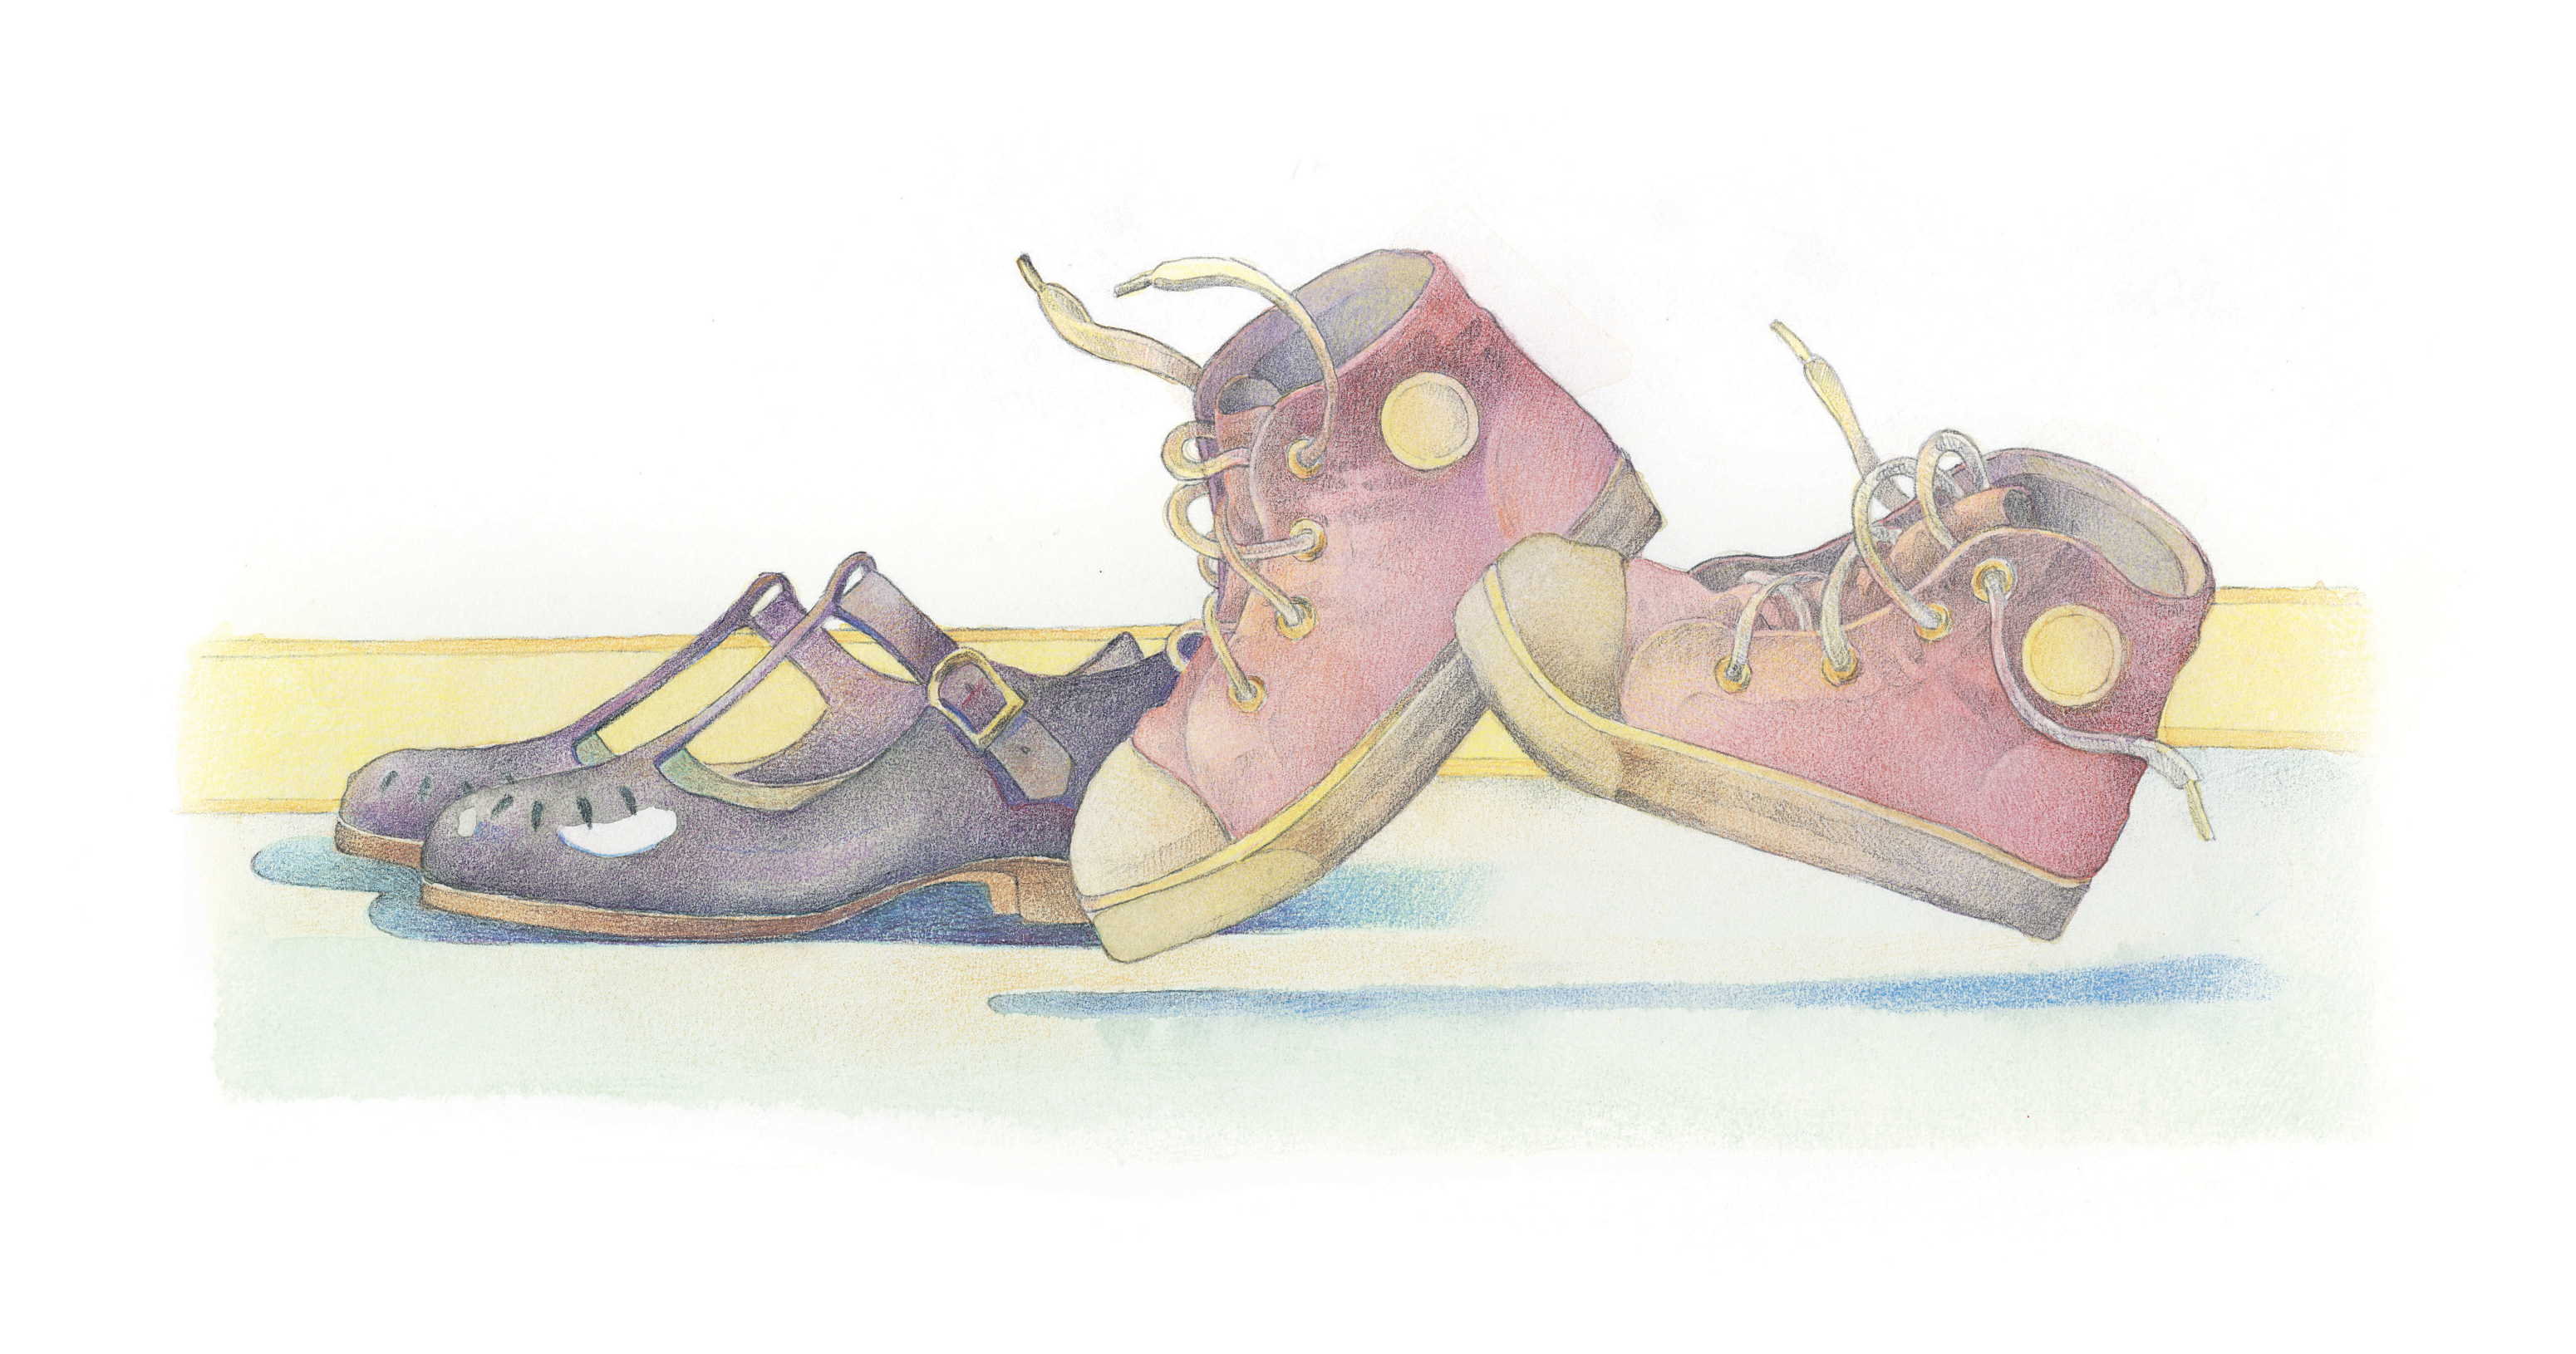 Two pairs of children’s shoes. From the Children’s Songbook, page 270, “Two Happy Feet”; watercolor illustration by Richard Hull.